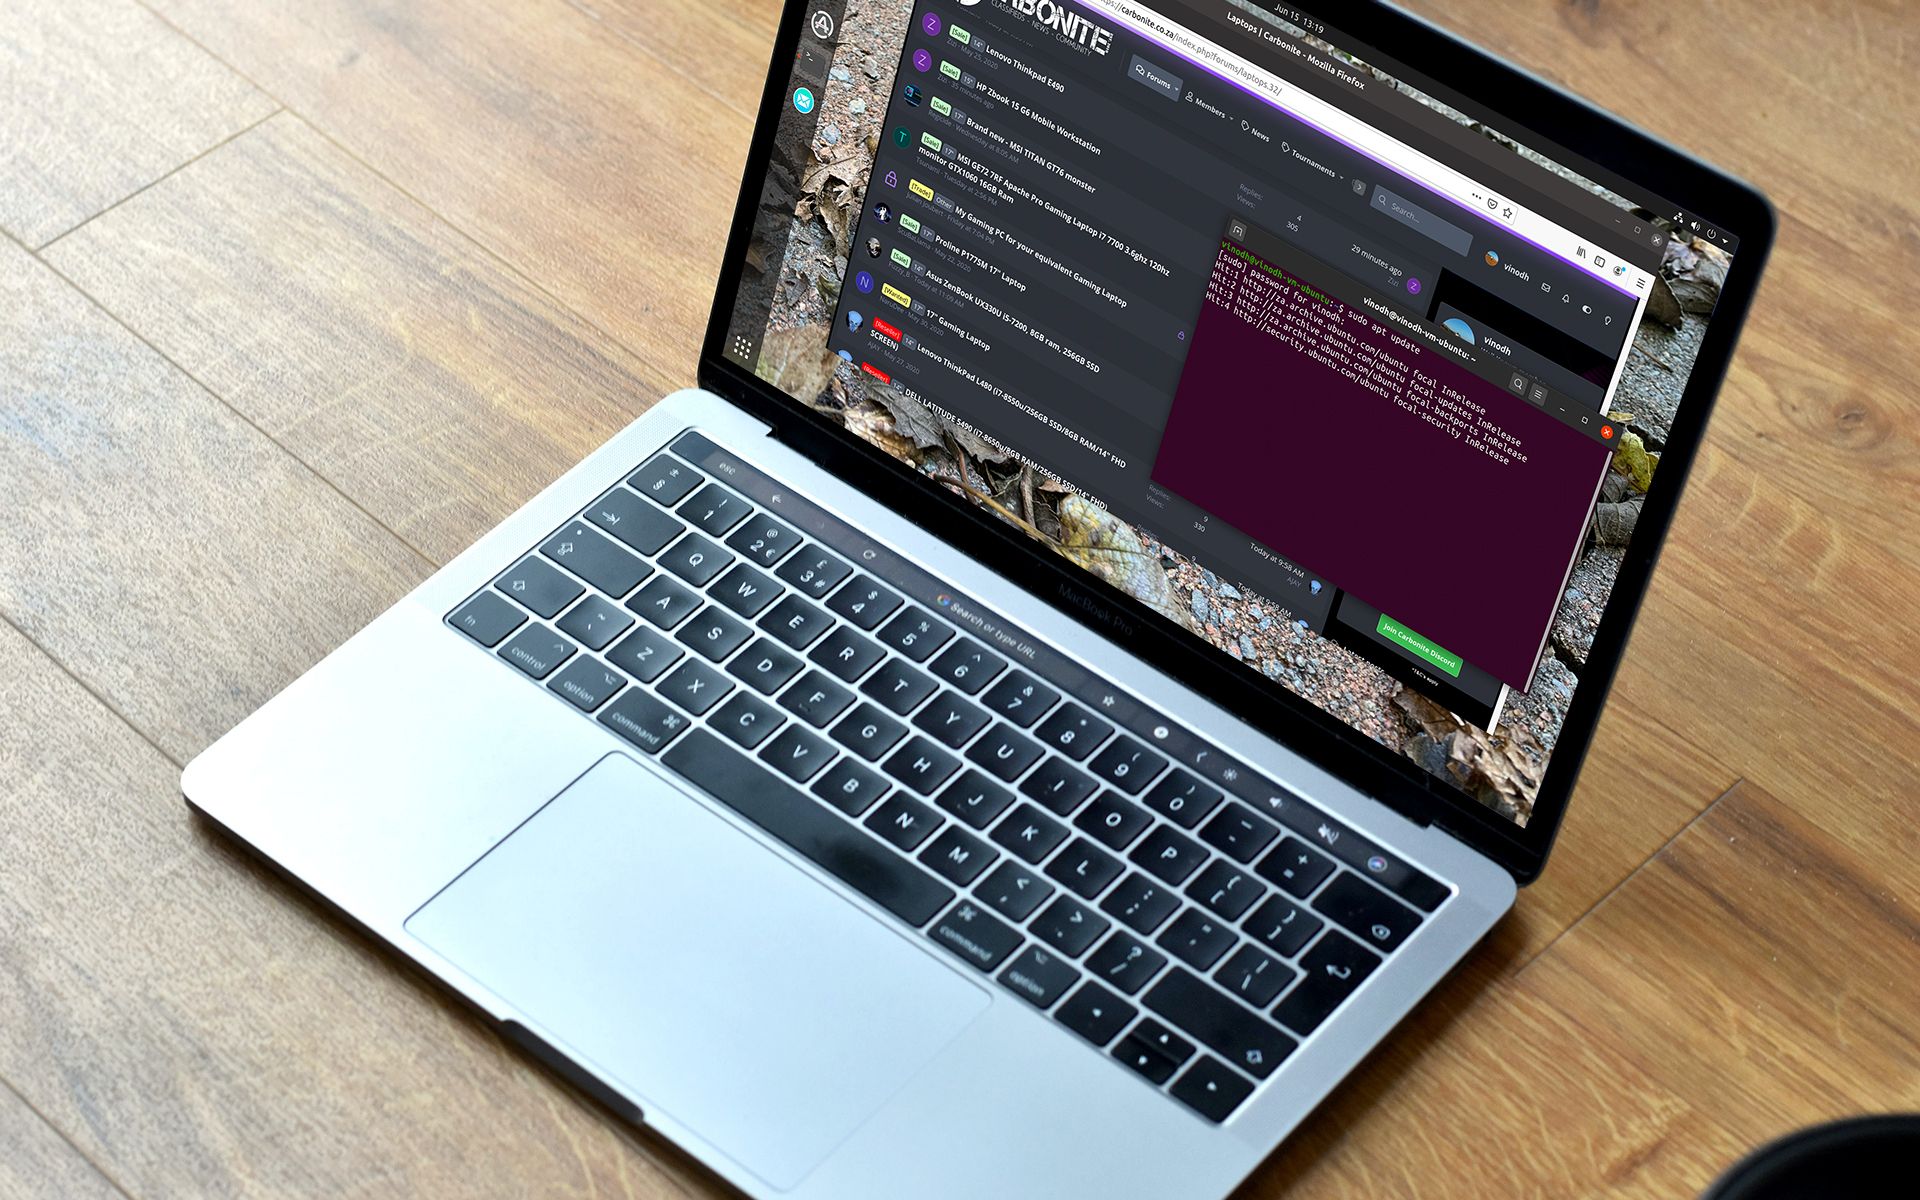 Linux touchpad like a Macbook: goal worth pursuing?